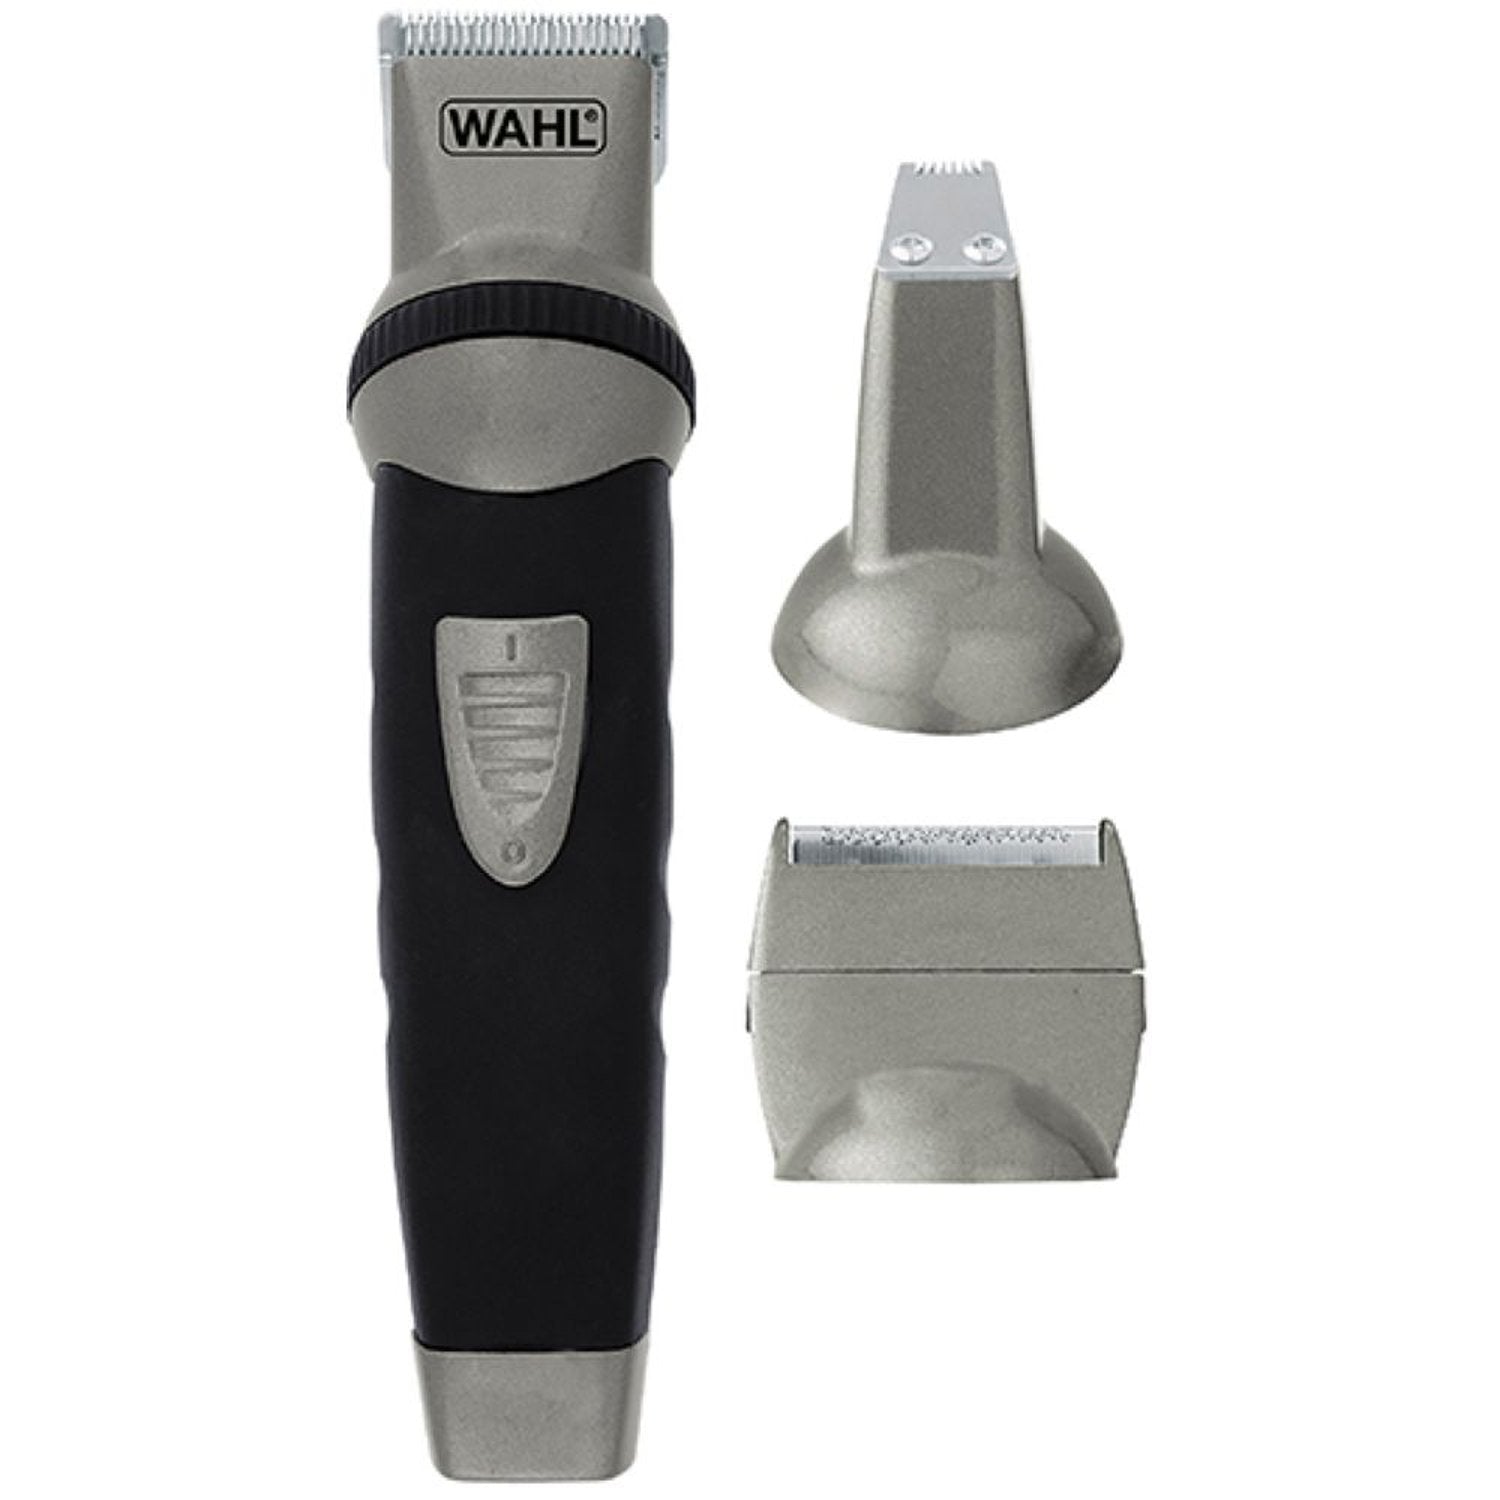 Wahl Groomsman All in one Body Trimmer | Hair Care & Styling | Halabh.com